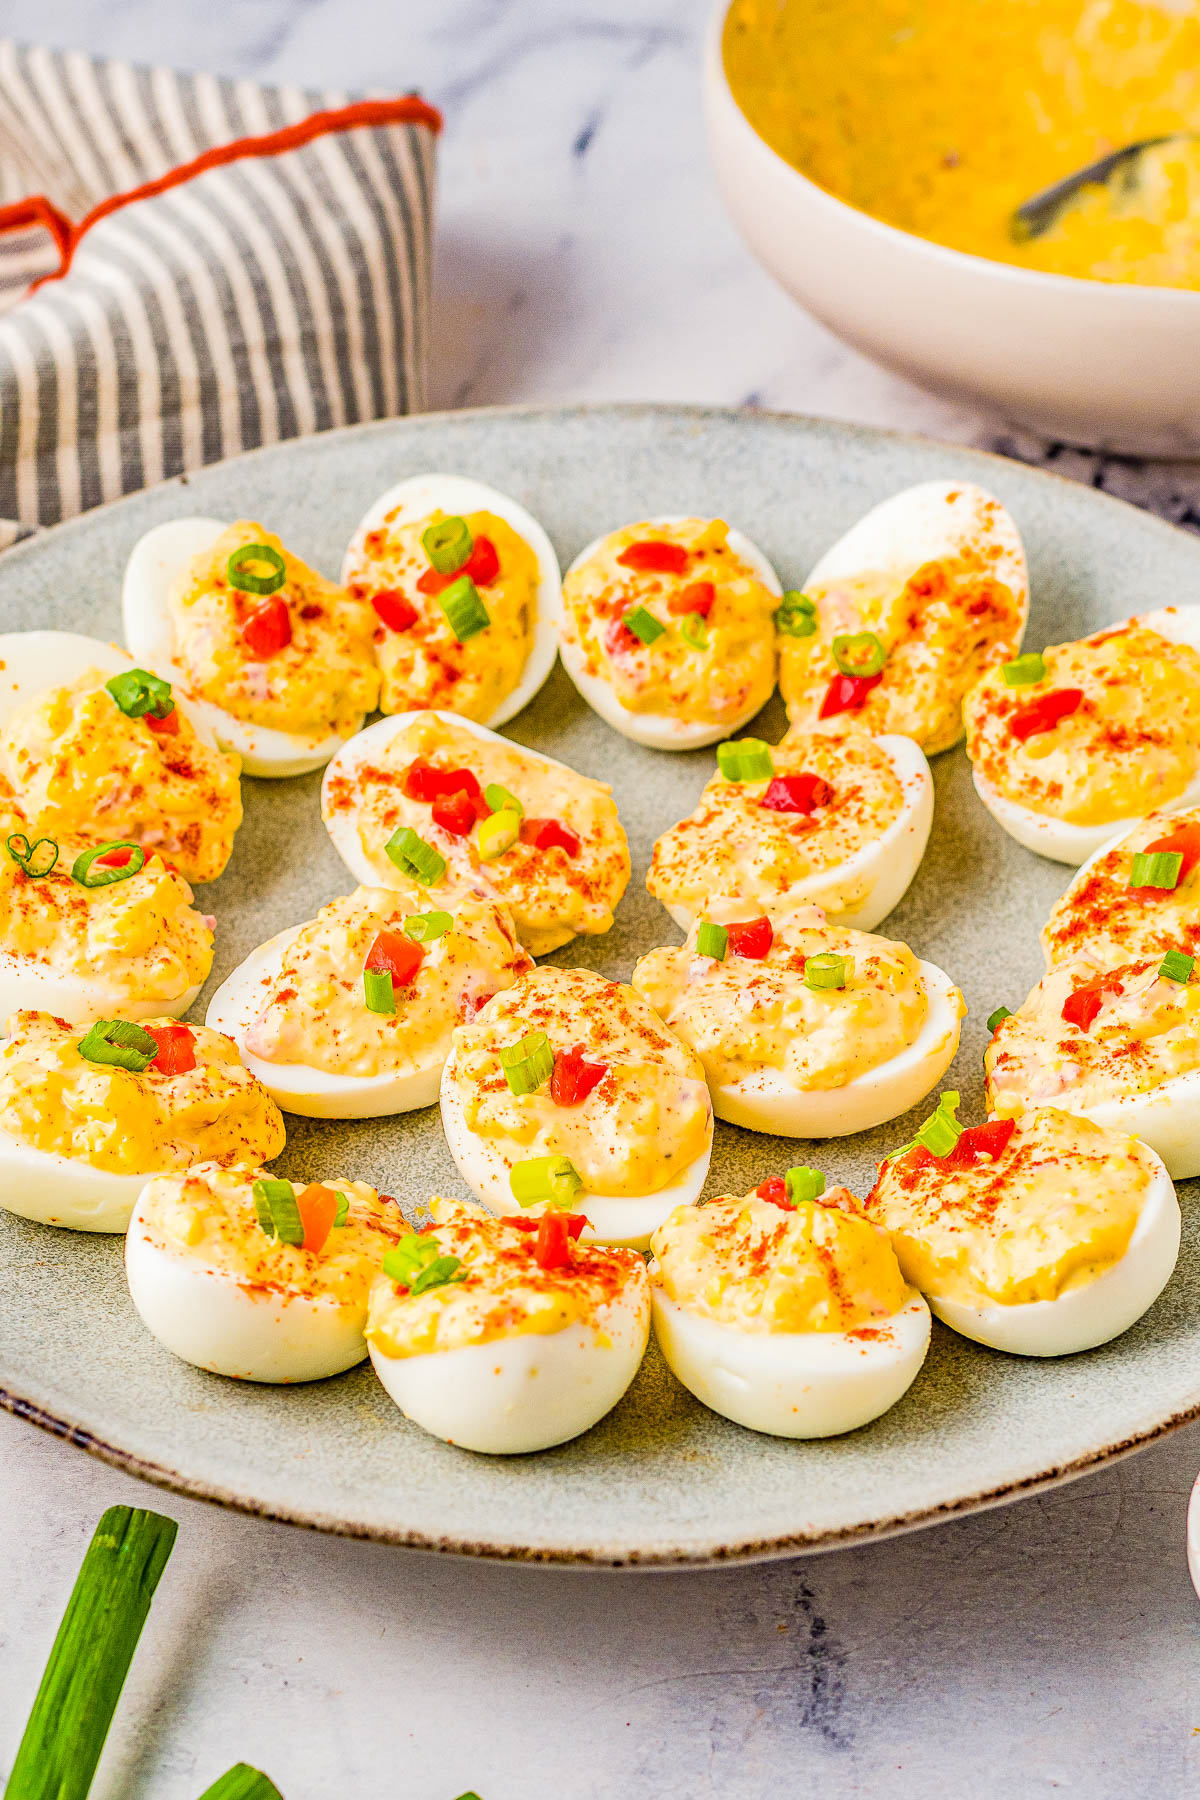 Pimento Cheese Deviled Eggs - A FAST and EASY recipe for the BEST deviled eggs because they're creamy, cheesy, and spiked with pimentos! Whether you're making them for a holiday party, game day or tailgating event, these are sure to be a crowd FAVORITE!